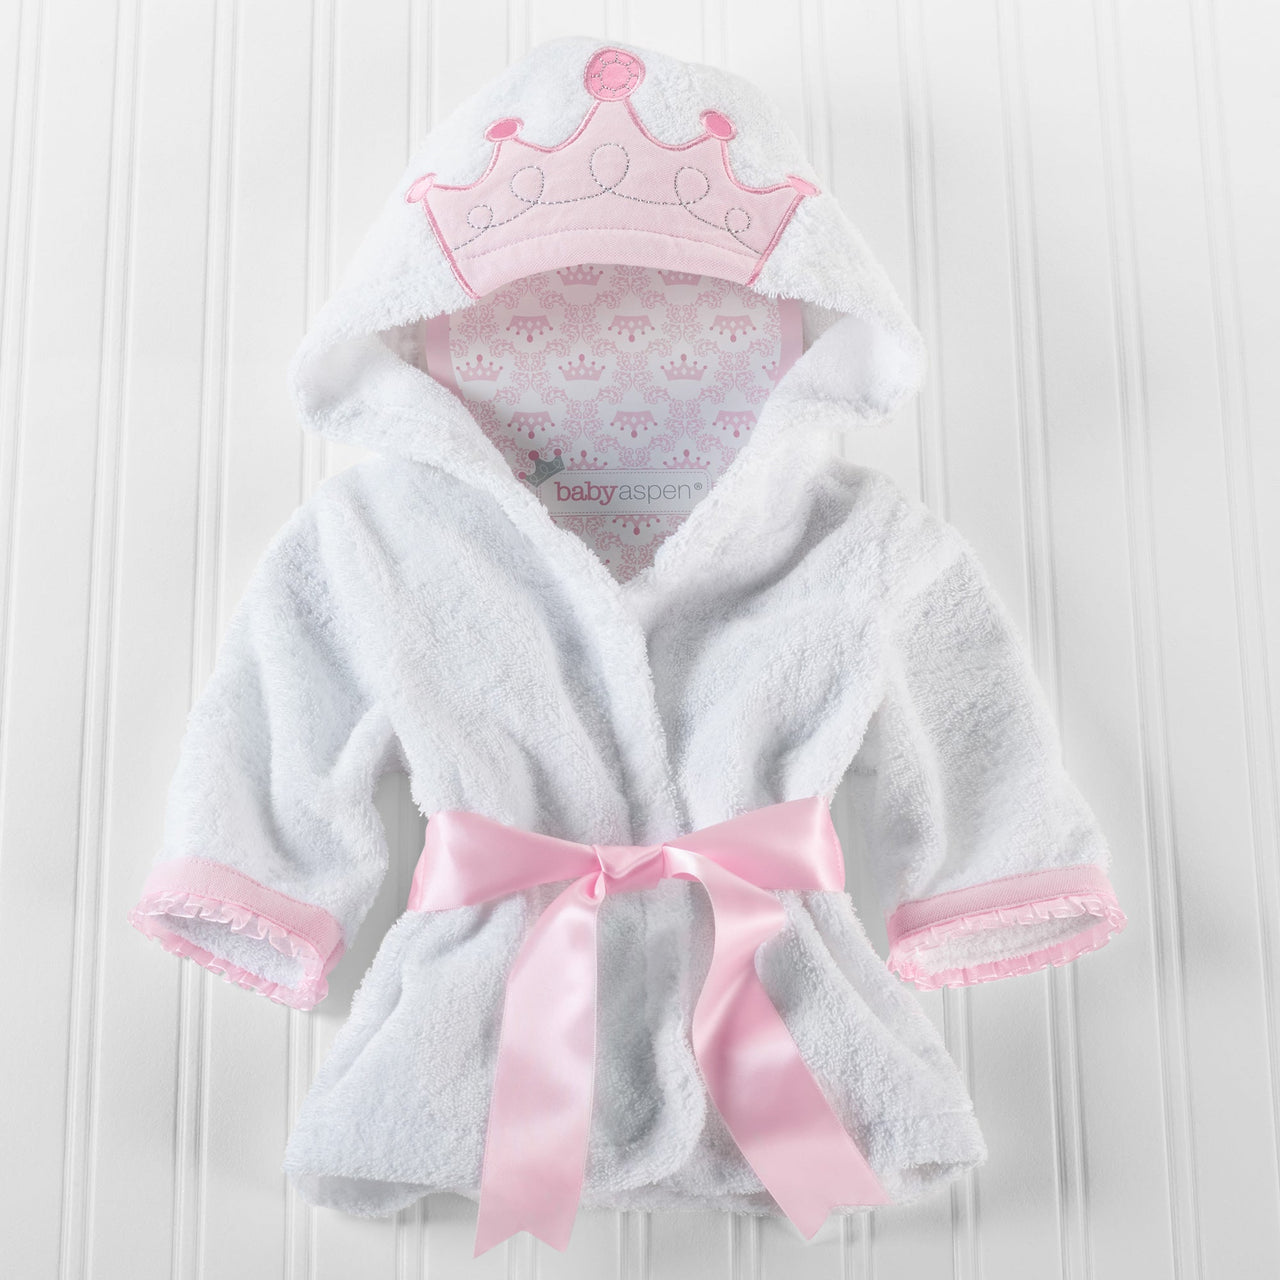 Little Princess Hooded Spa Robe (Personalization Available)